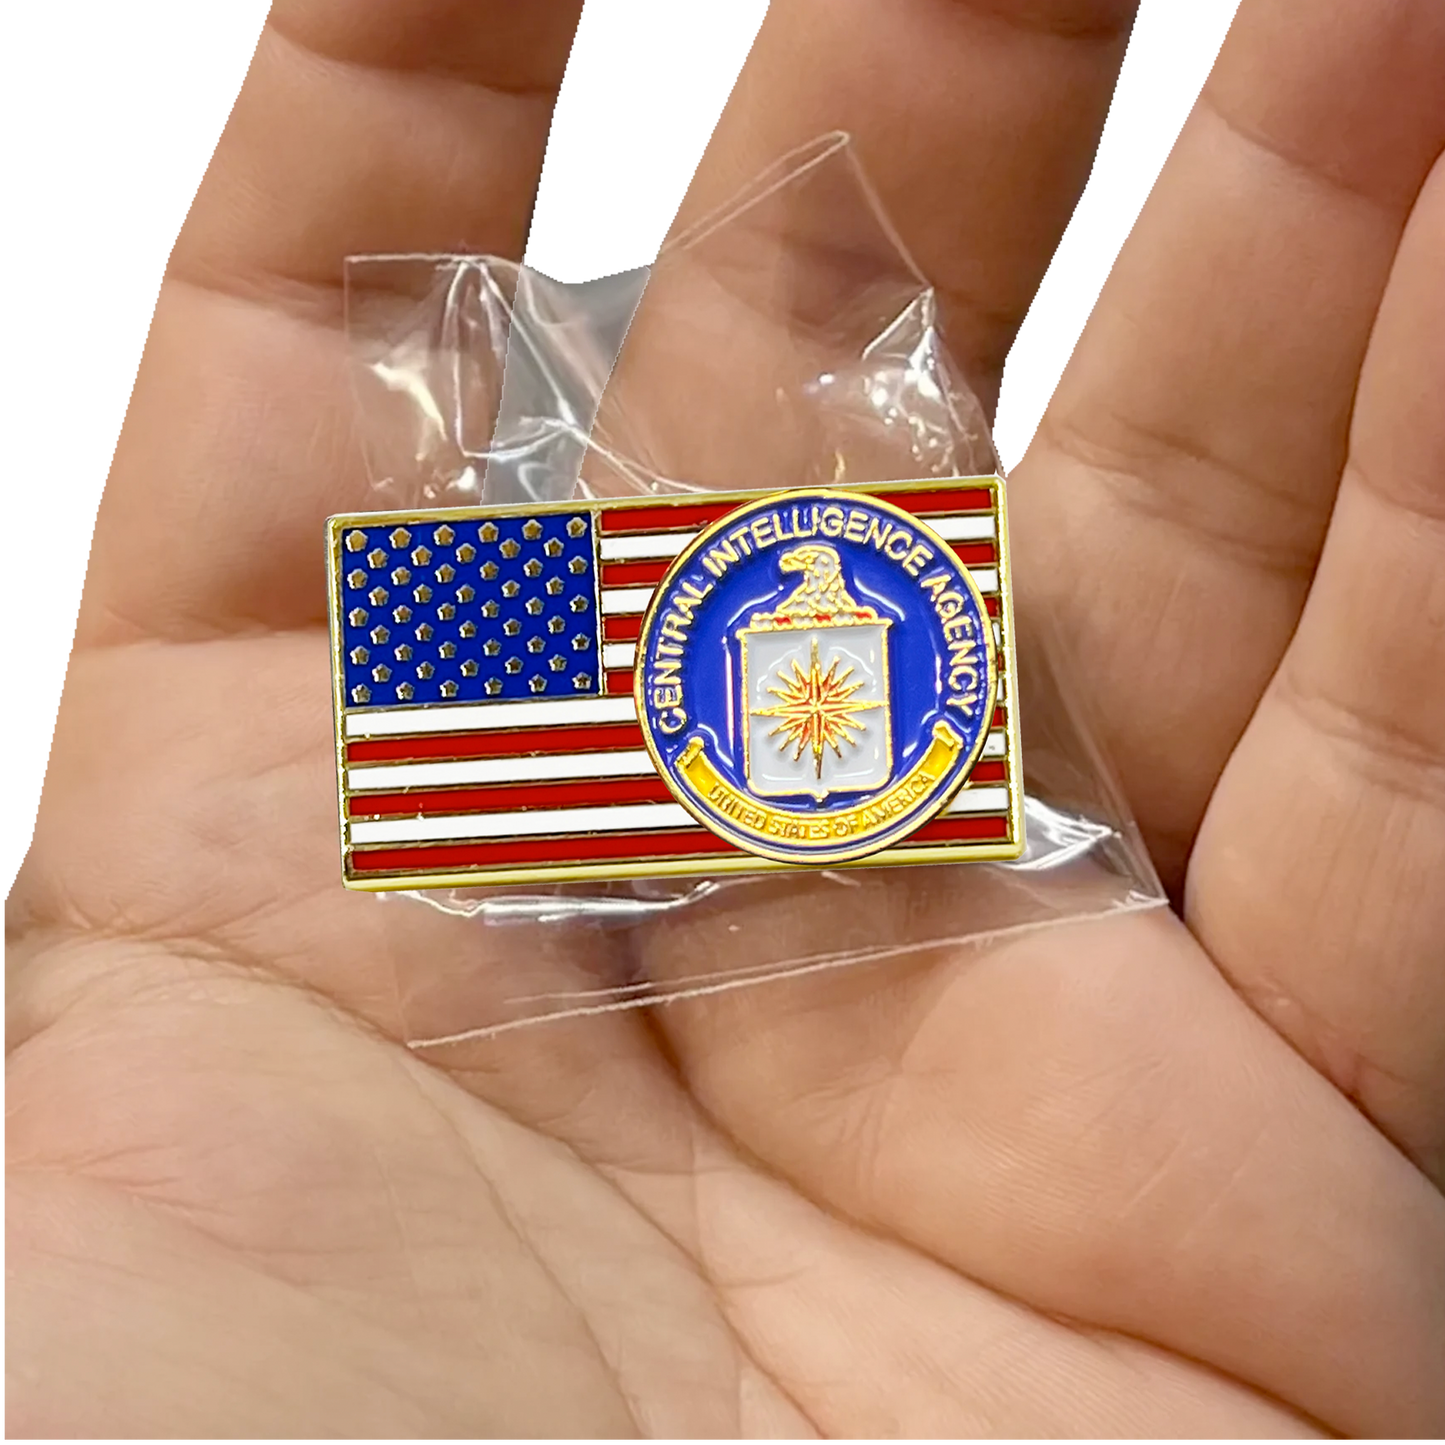 PBX-005-H CIA Pin Central Intelligence Agency Clandestine Agent Officer American Flag Pin